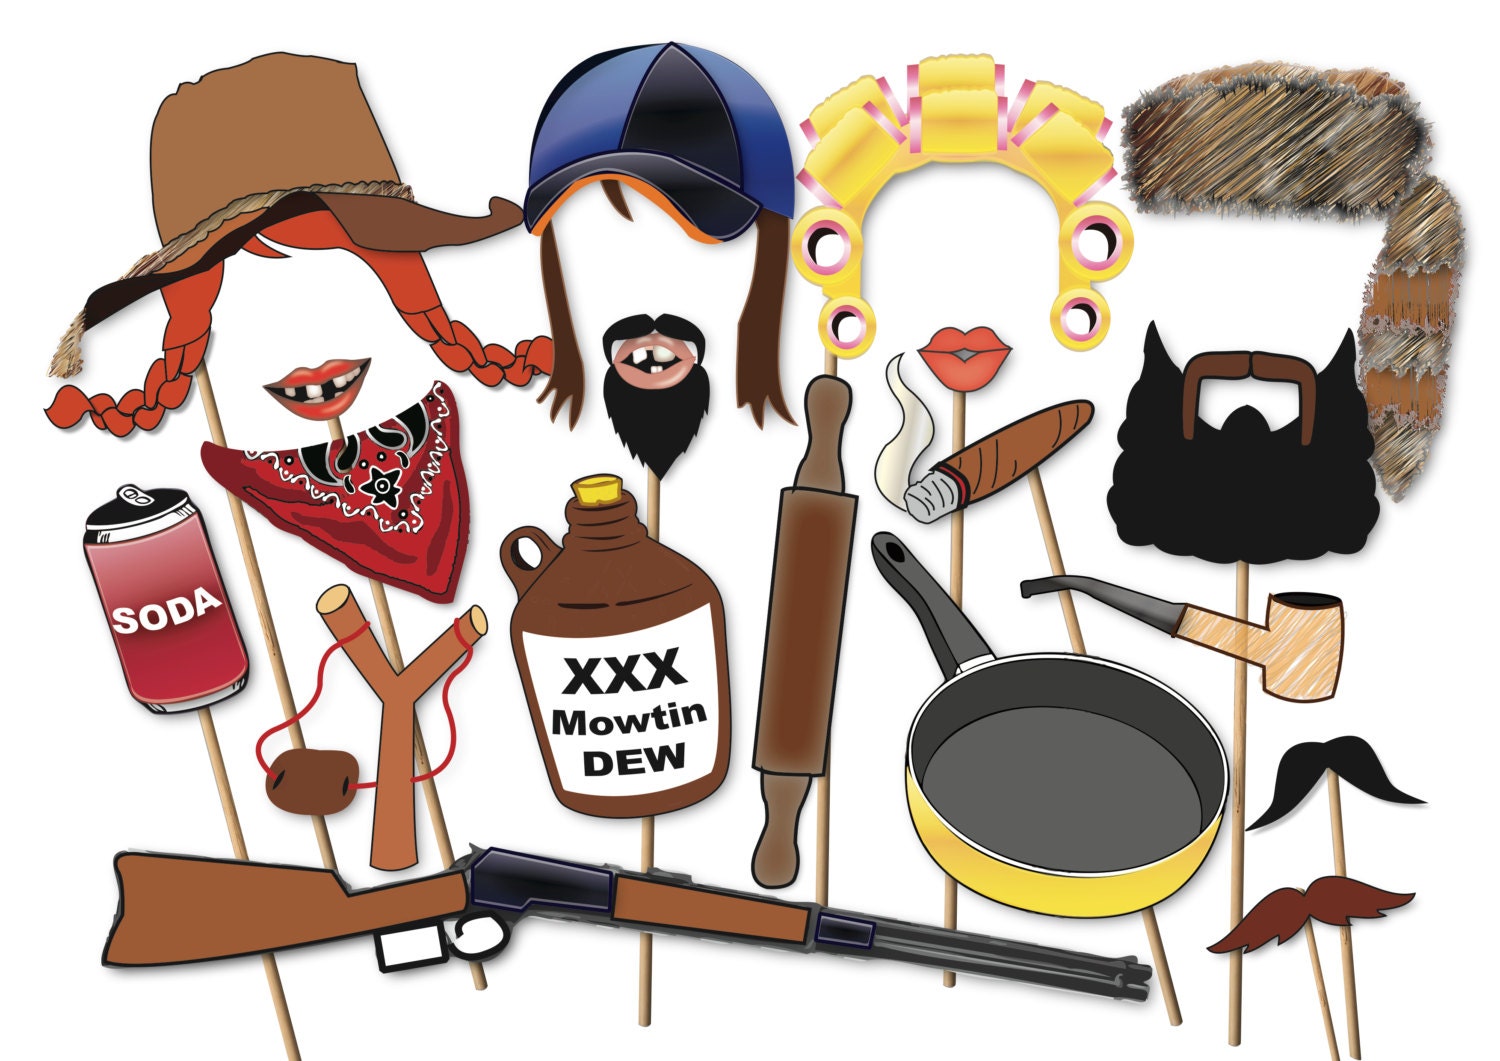 hillbilly-redneck-photo-booth-props-party-set-22-piece-printable